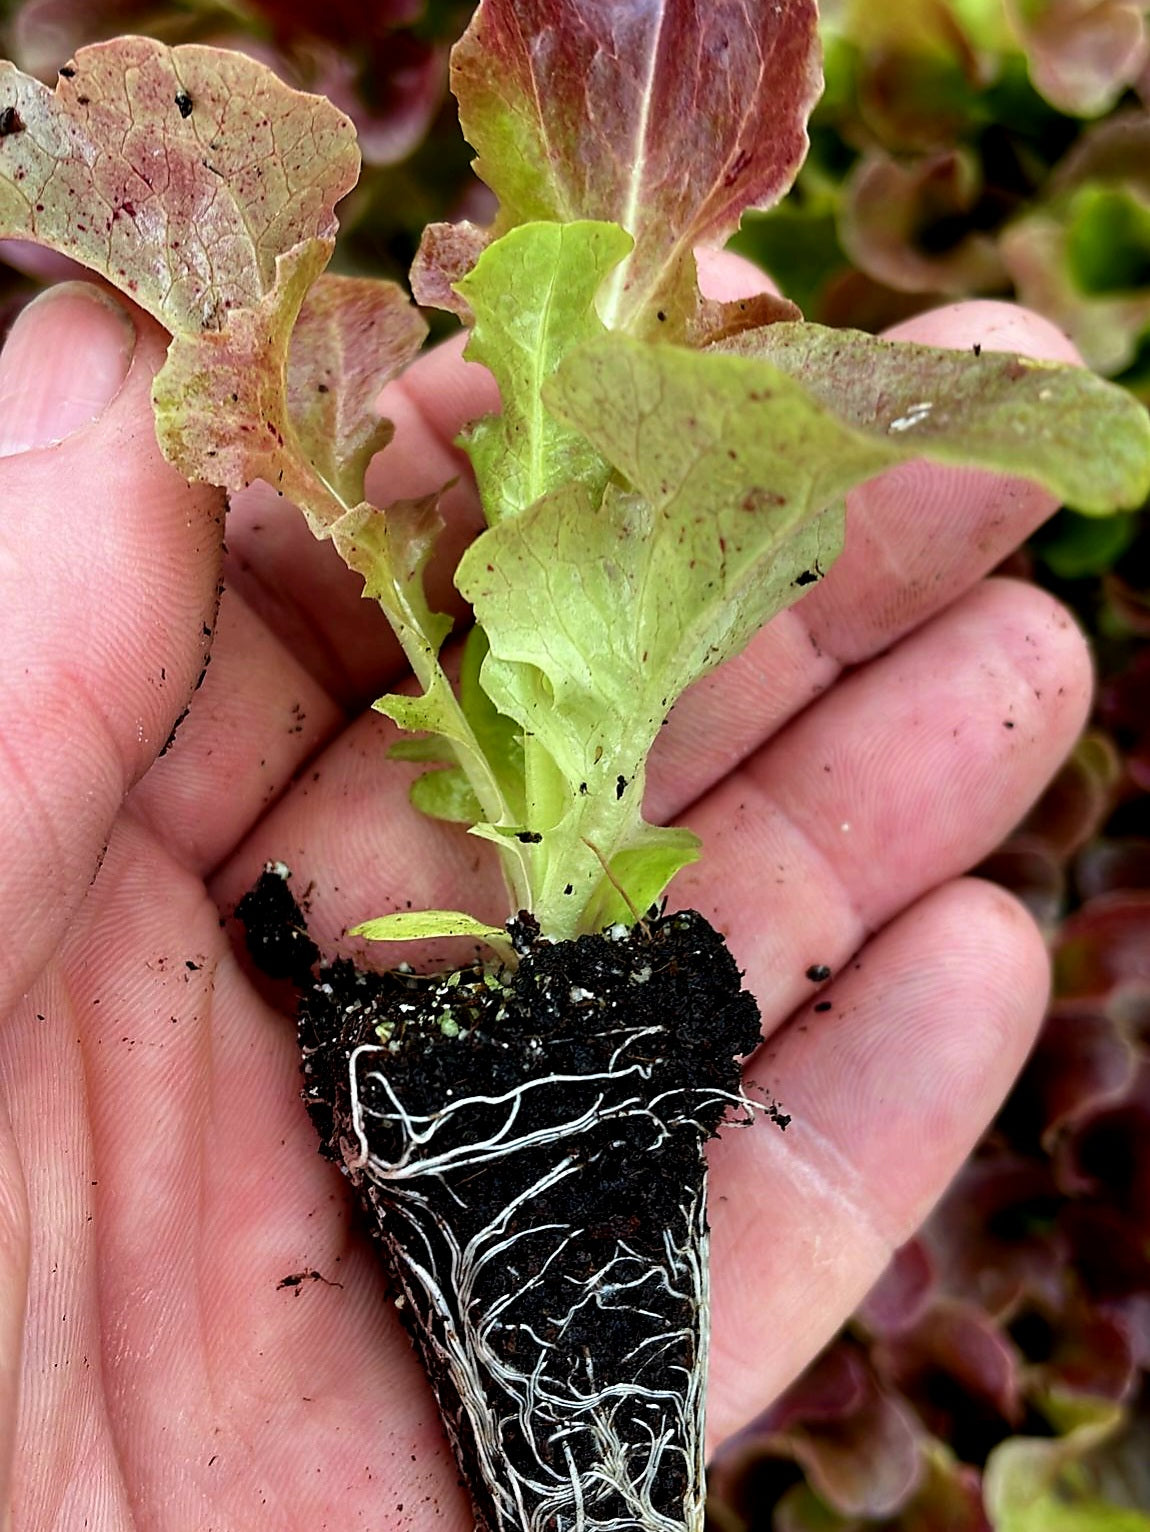 Red Oakleaf Lettuce Plug Plants "Grow Your Own" Salad 'Ready to Plant Now' Young Vegetable Plants **Letterbox Friendly**